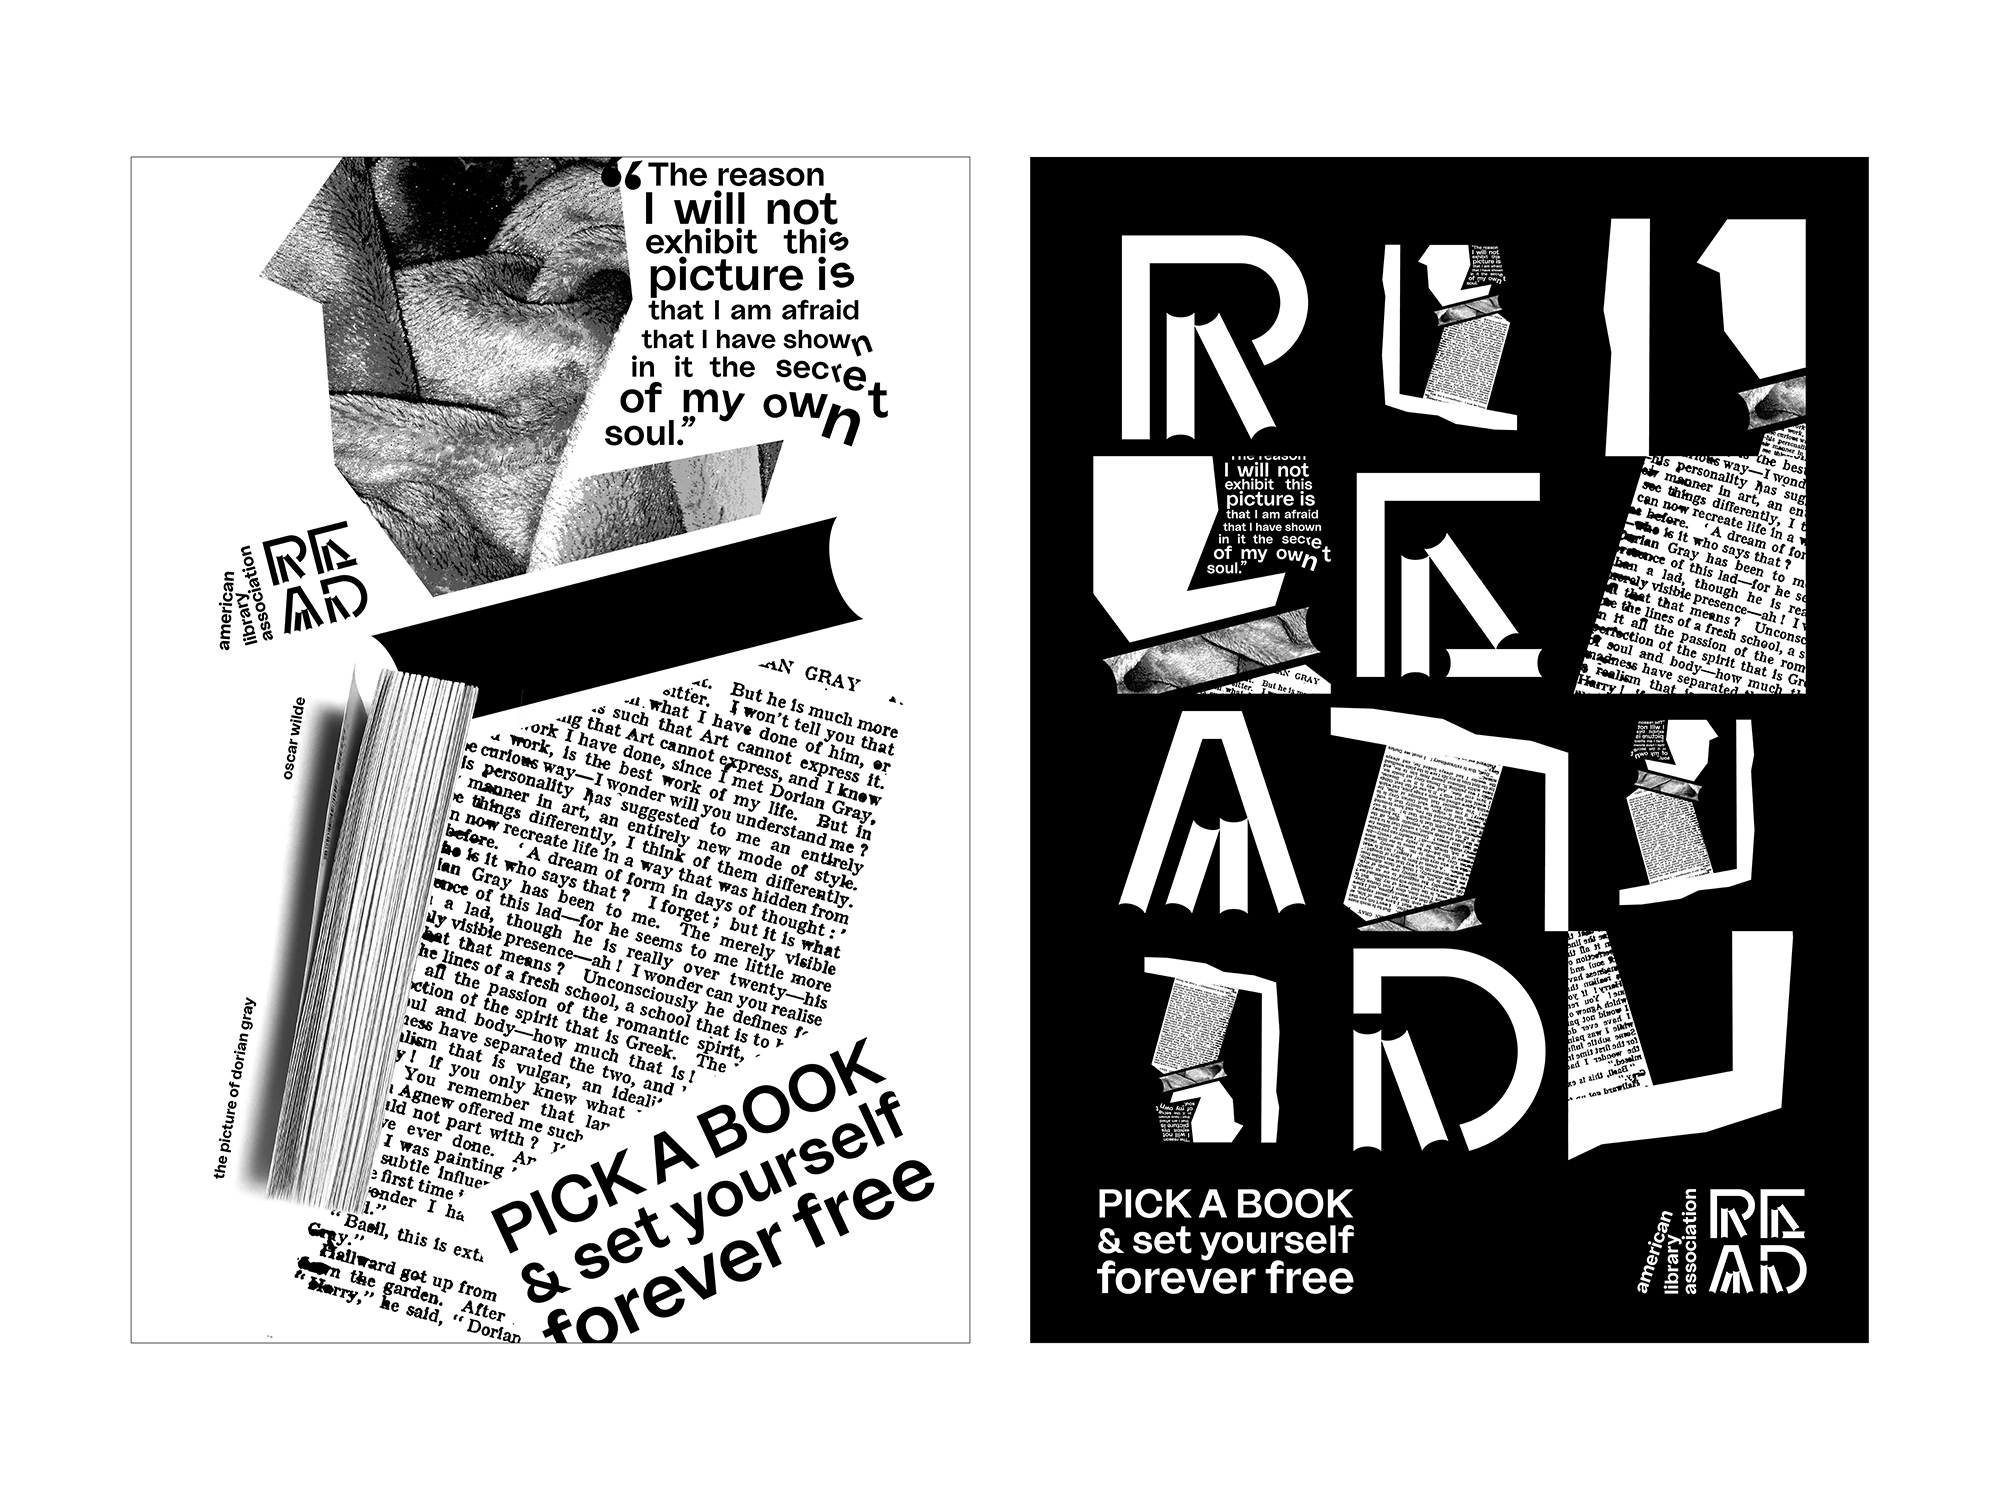 A collage featuring typography designed to promote reading.